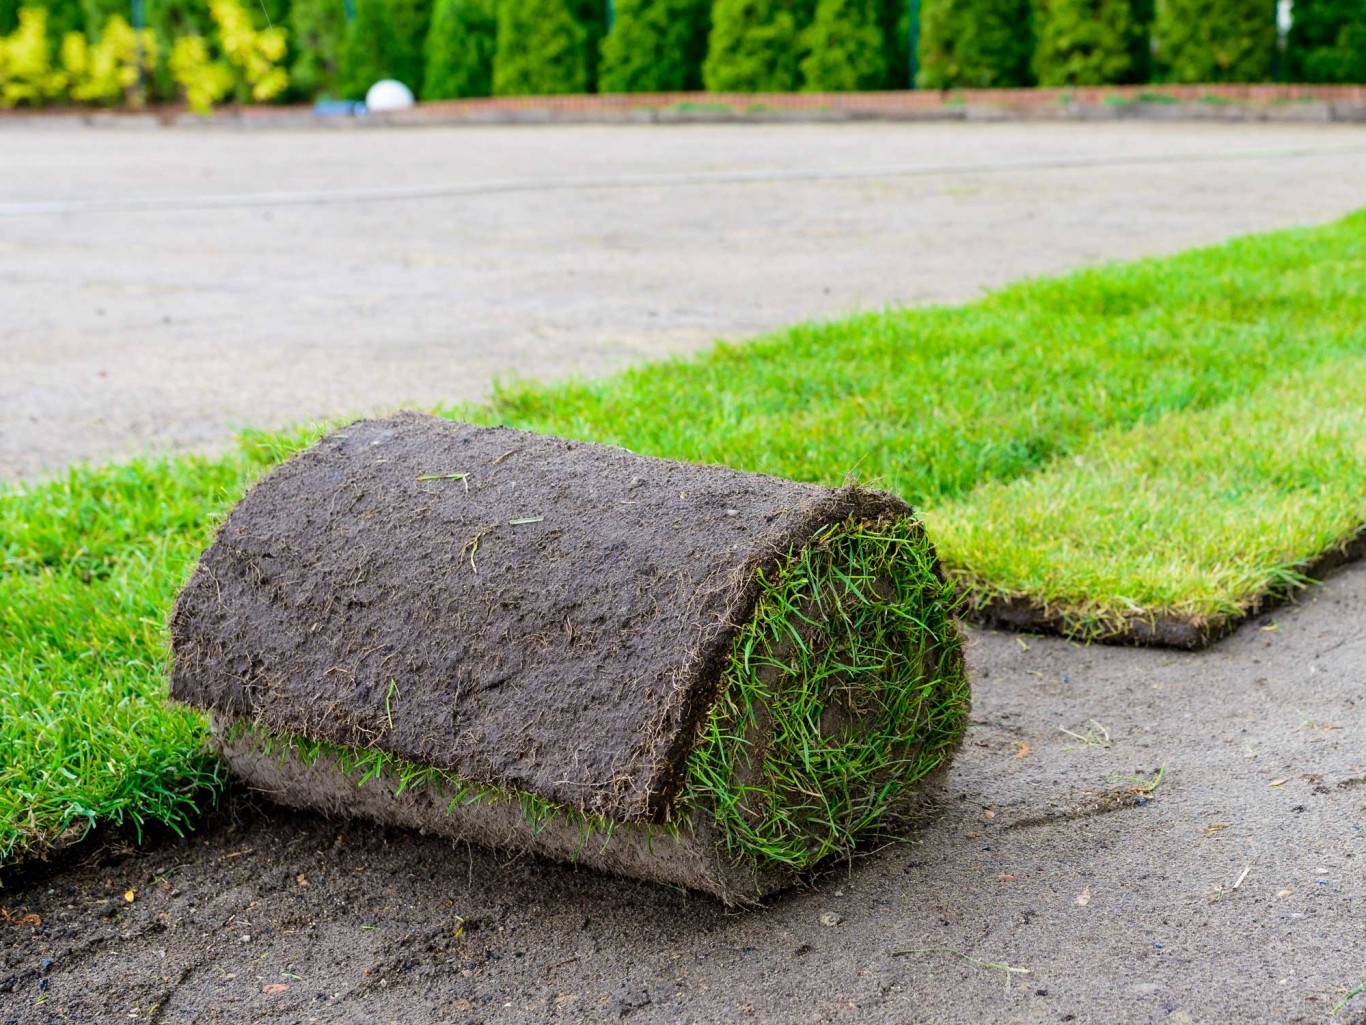 Laying lawn from a roll of turf.